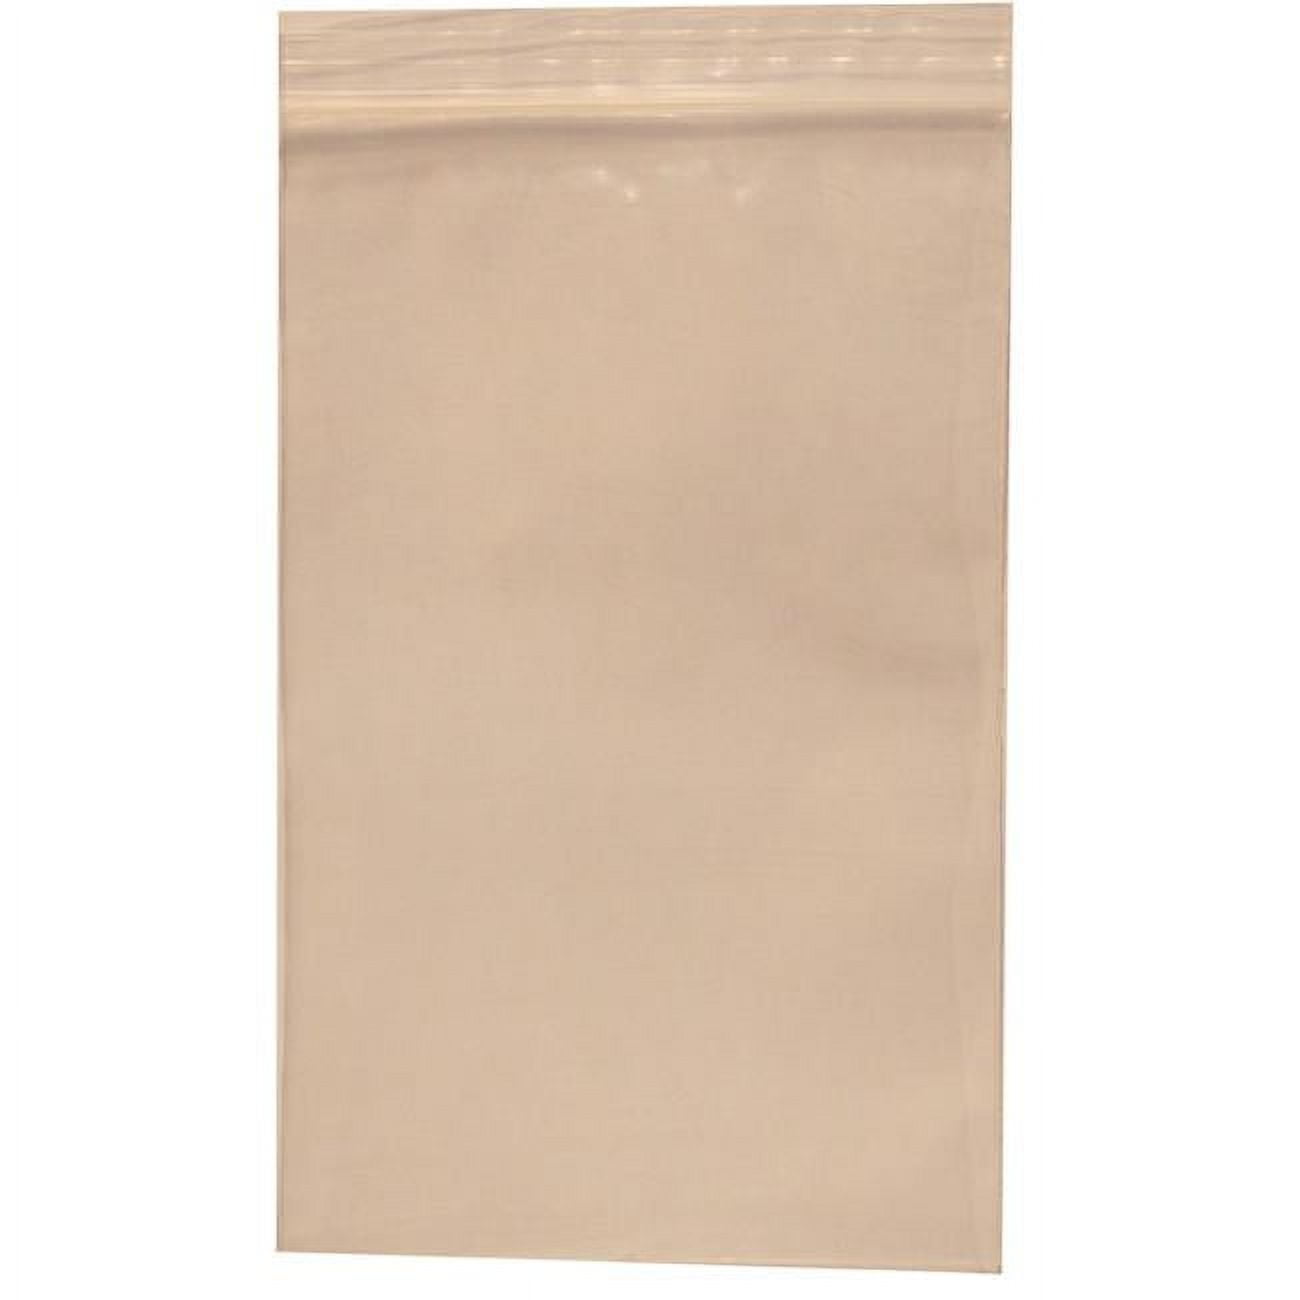 2287913 9 X 12 In. Reclosable Bag - Pack Of 1000